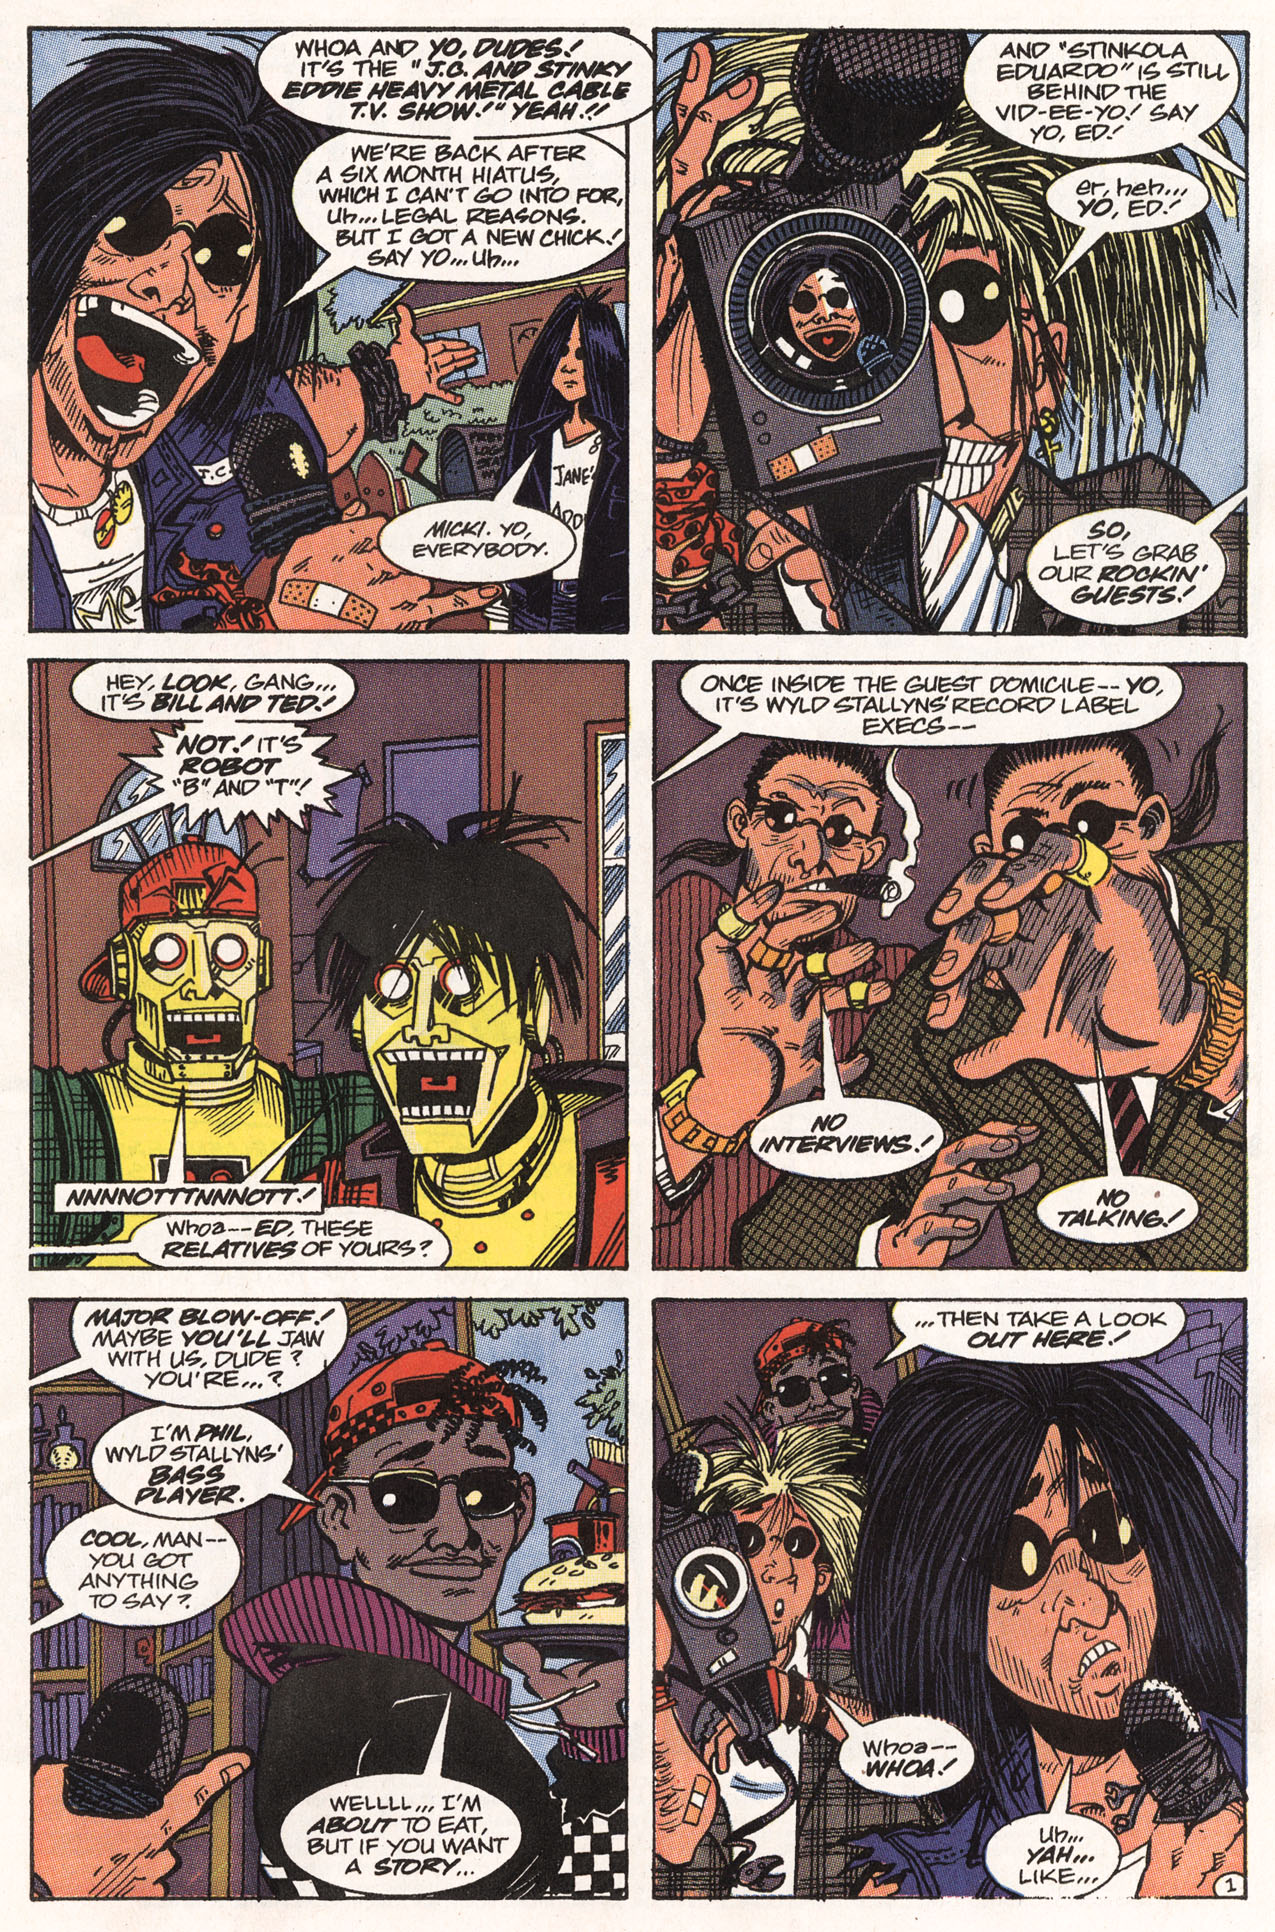 Read online Bill & Ted's Excellent Comic Book comic -  Issue #4 - 3